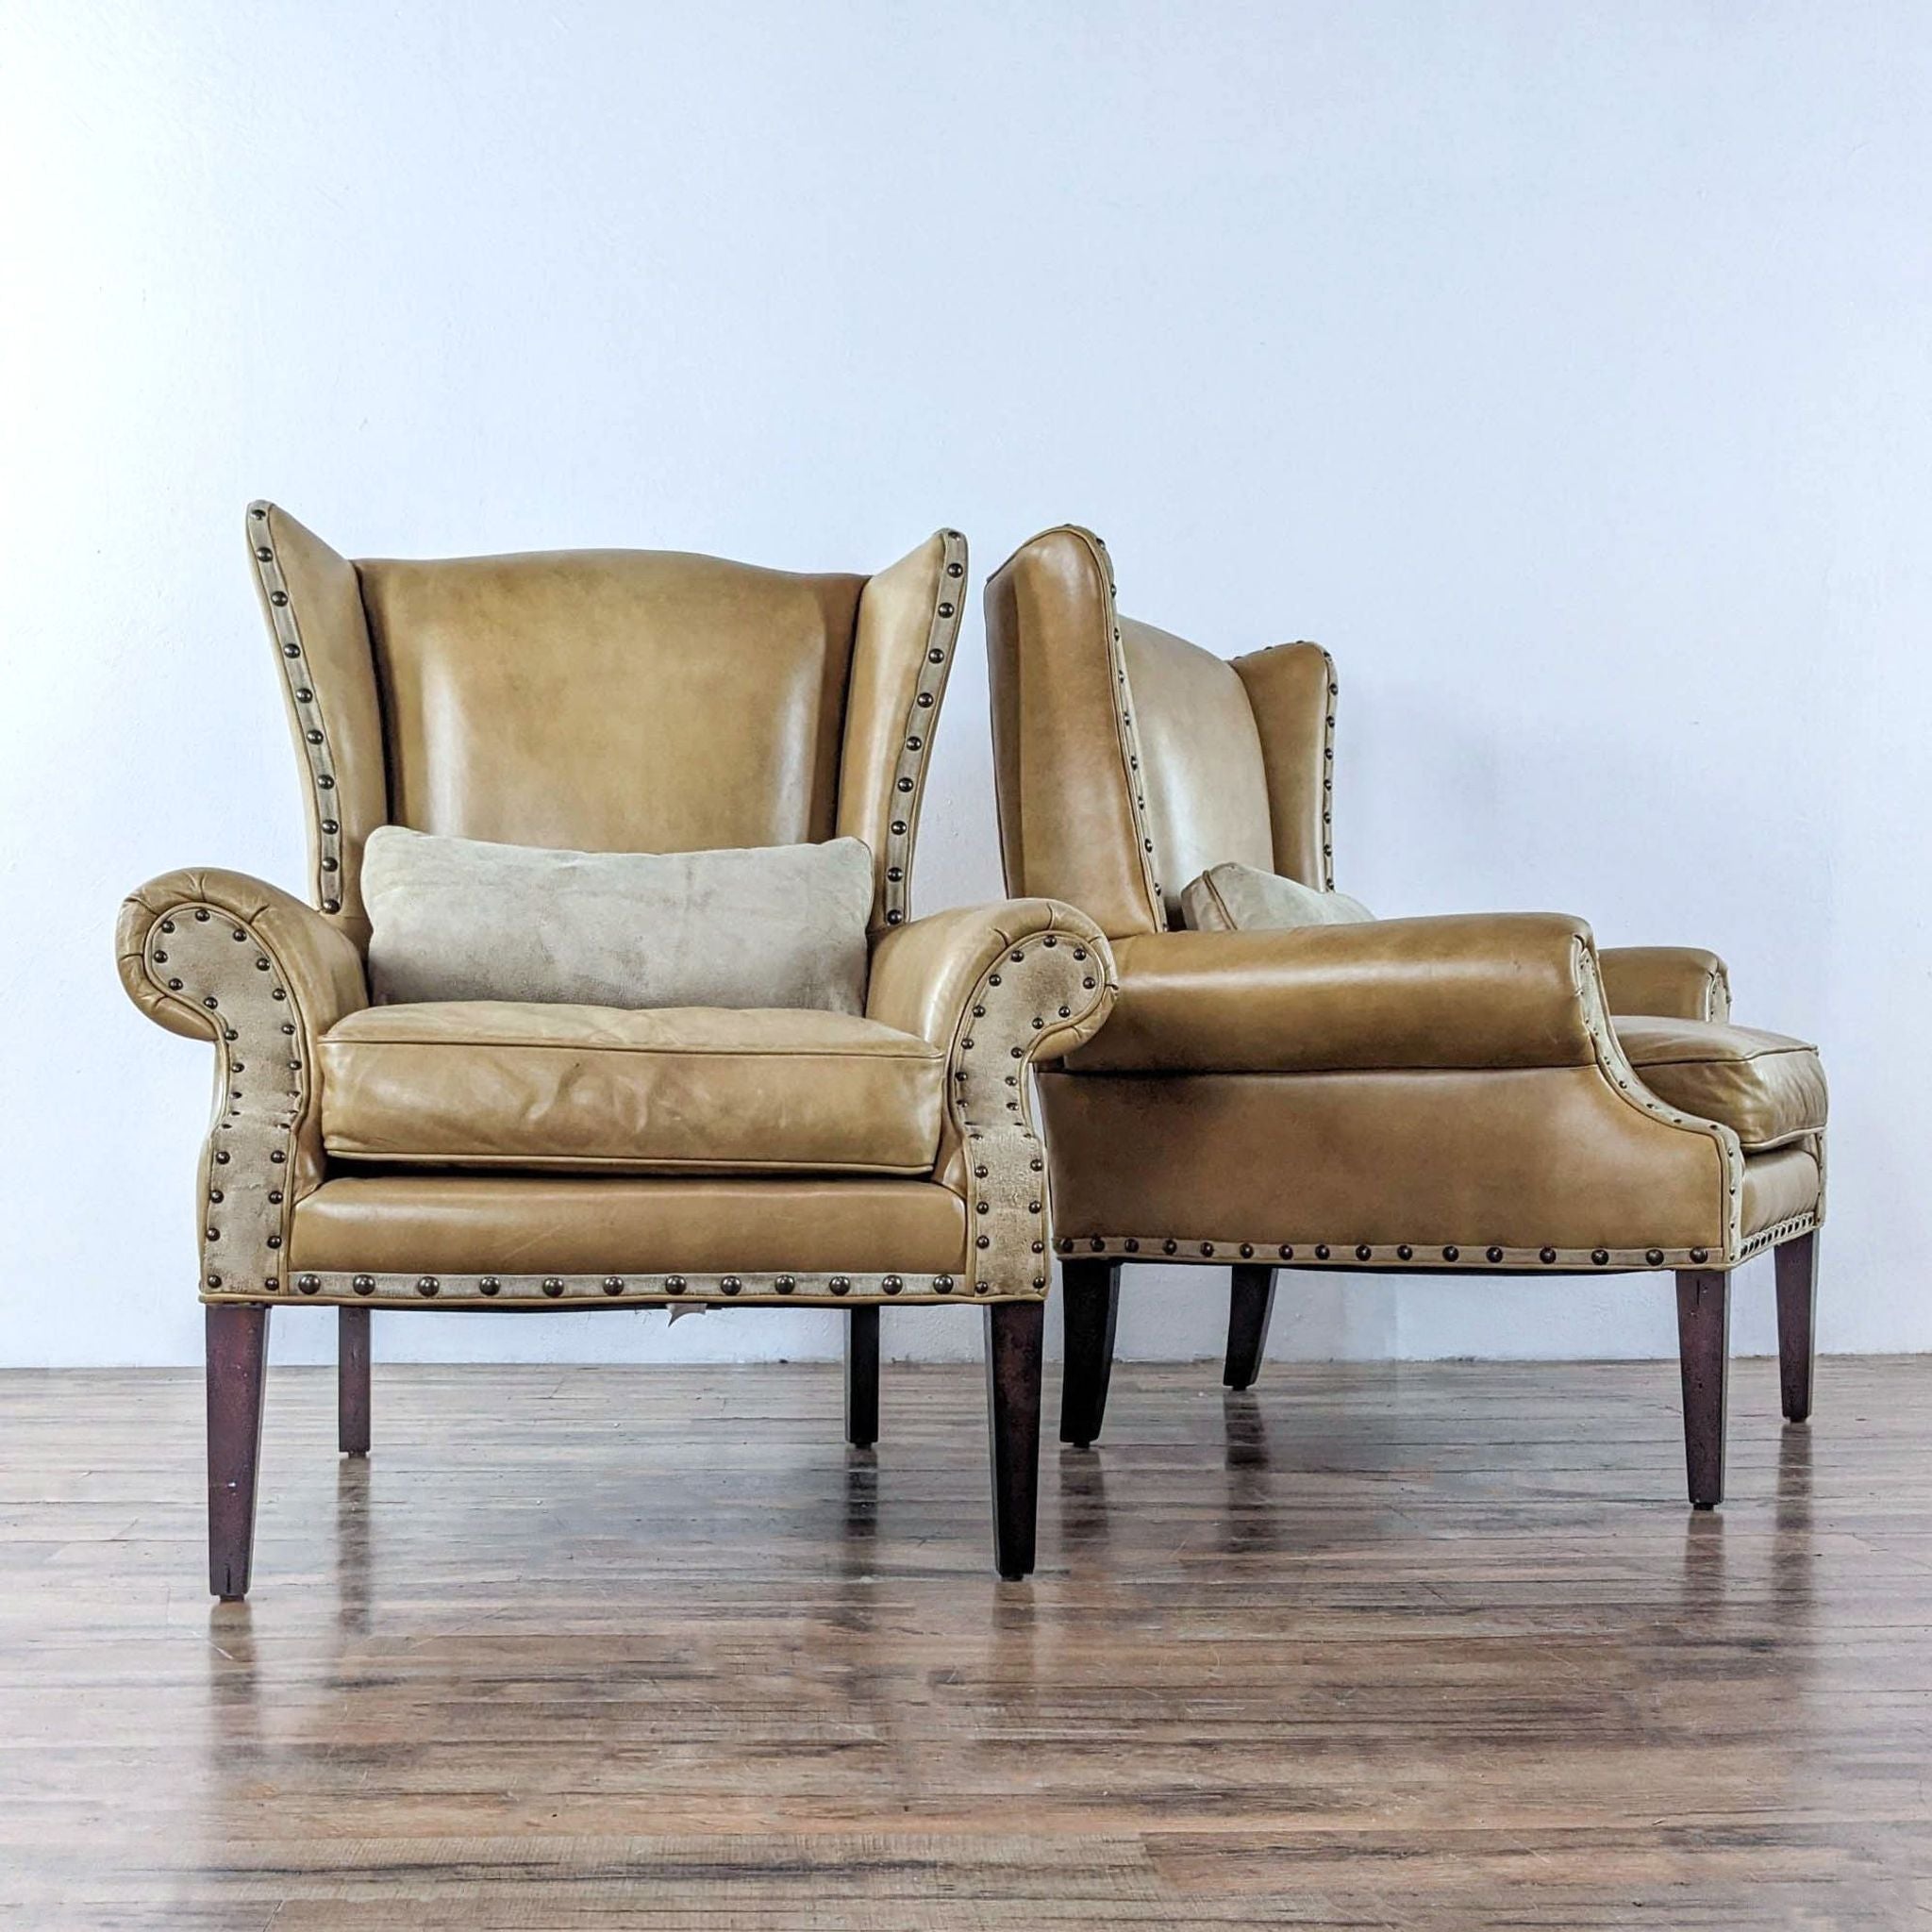 Two Barclay Butera Lifestyle wingback chairs in profile, tan leather with large nailhead accents on arms and base.